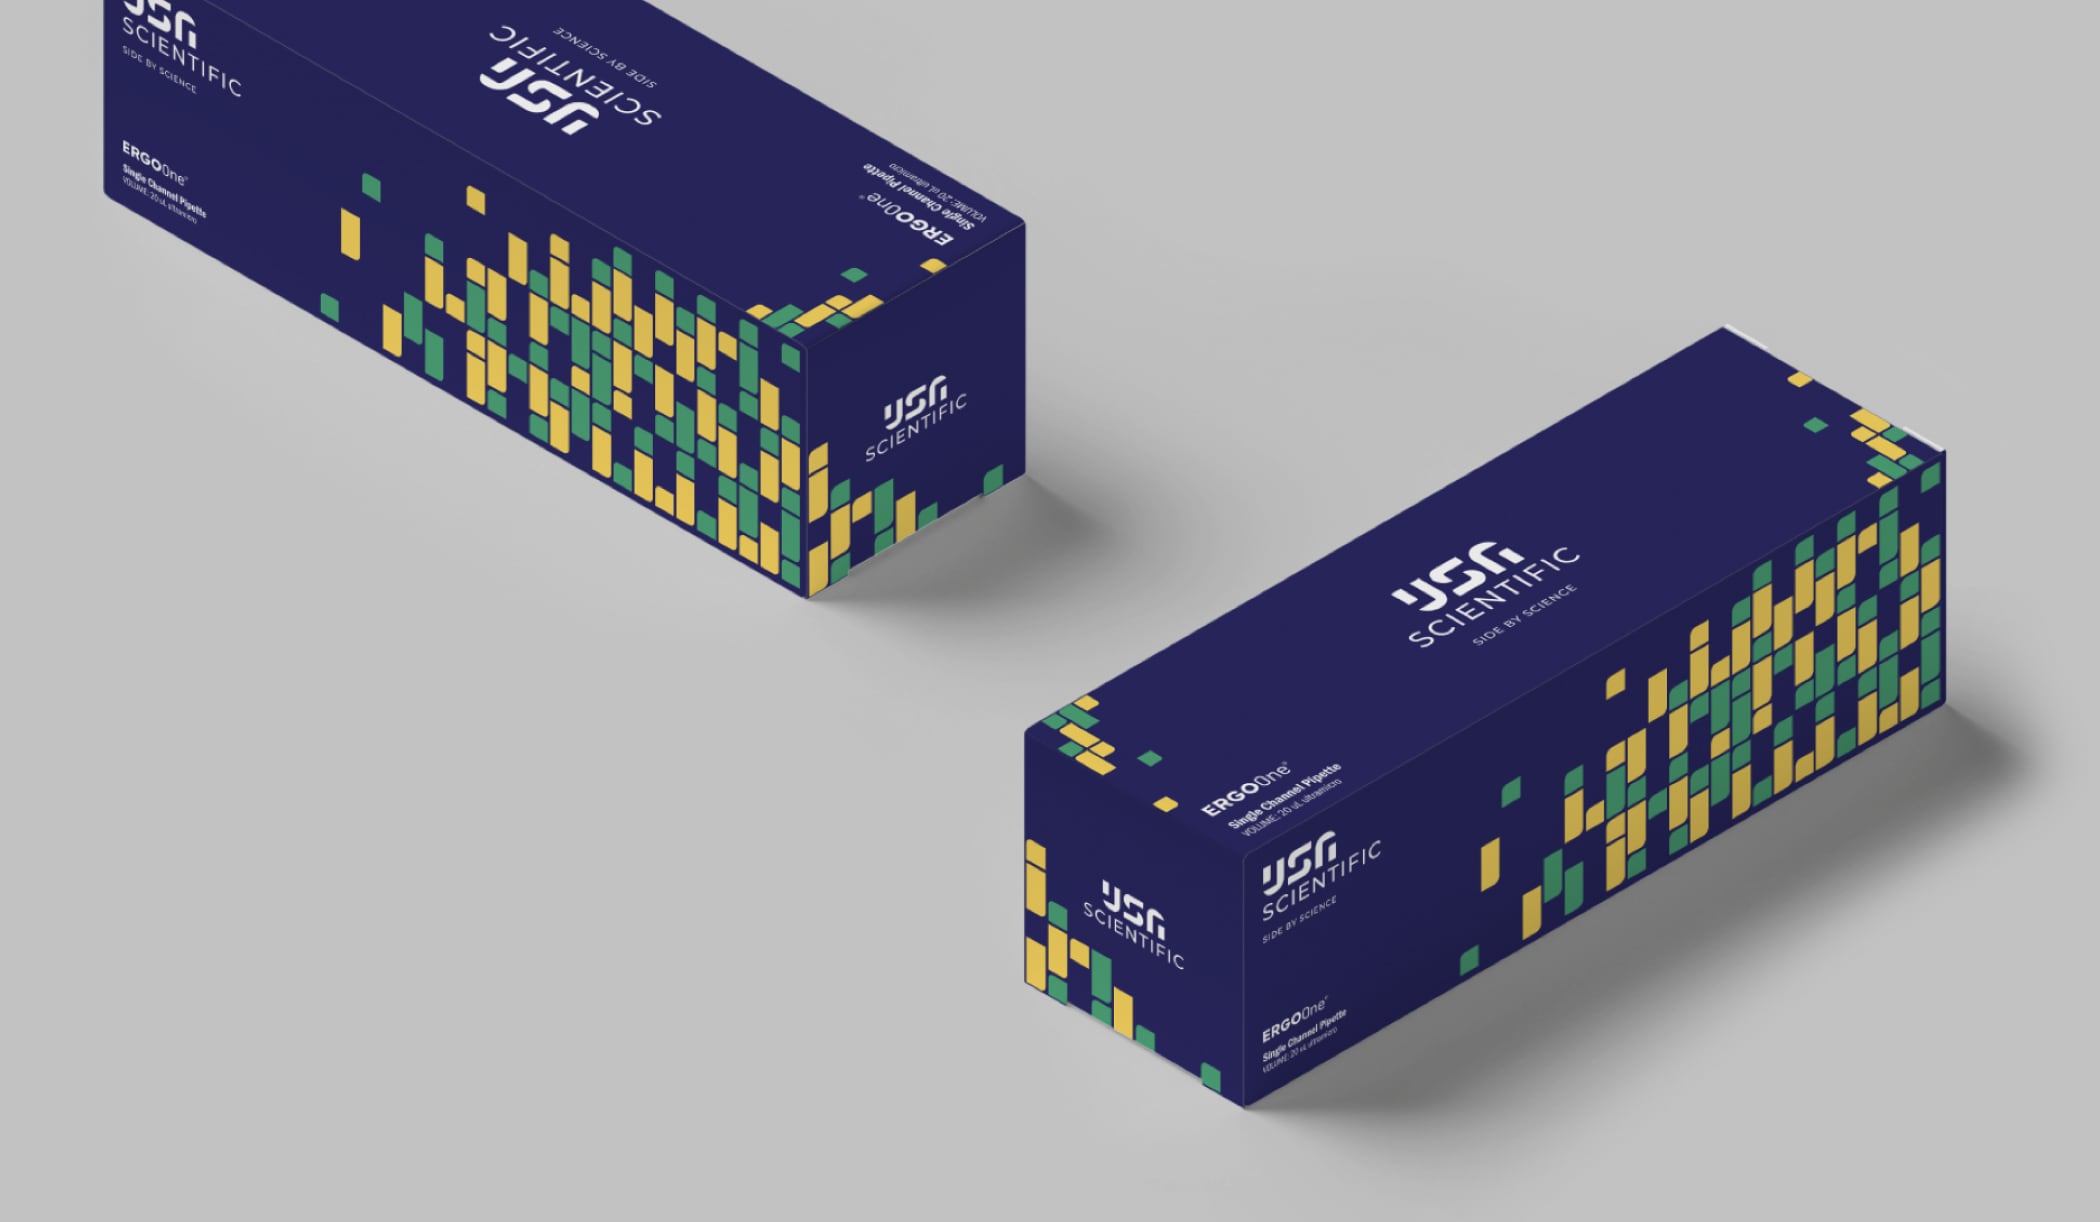 USA Scientific package design boxes